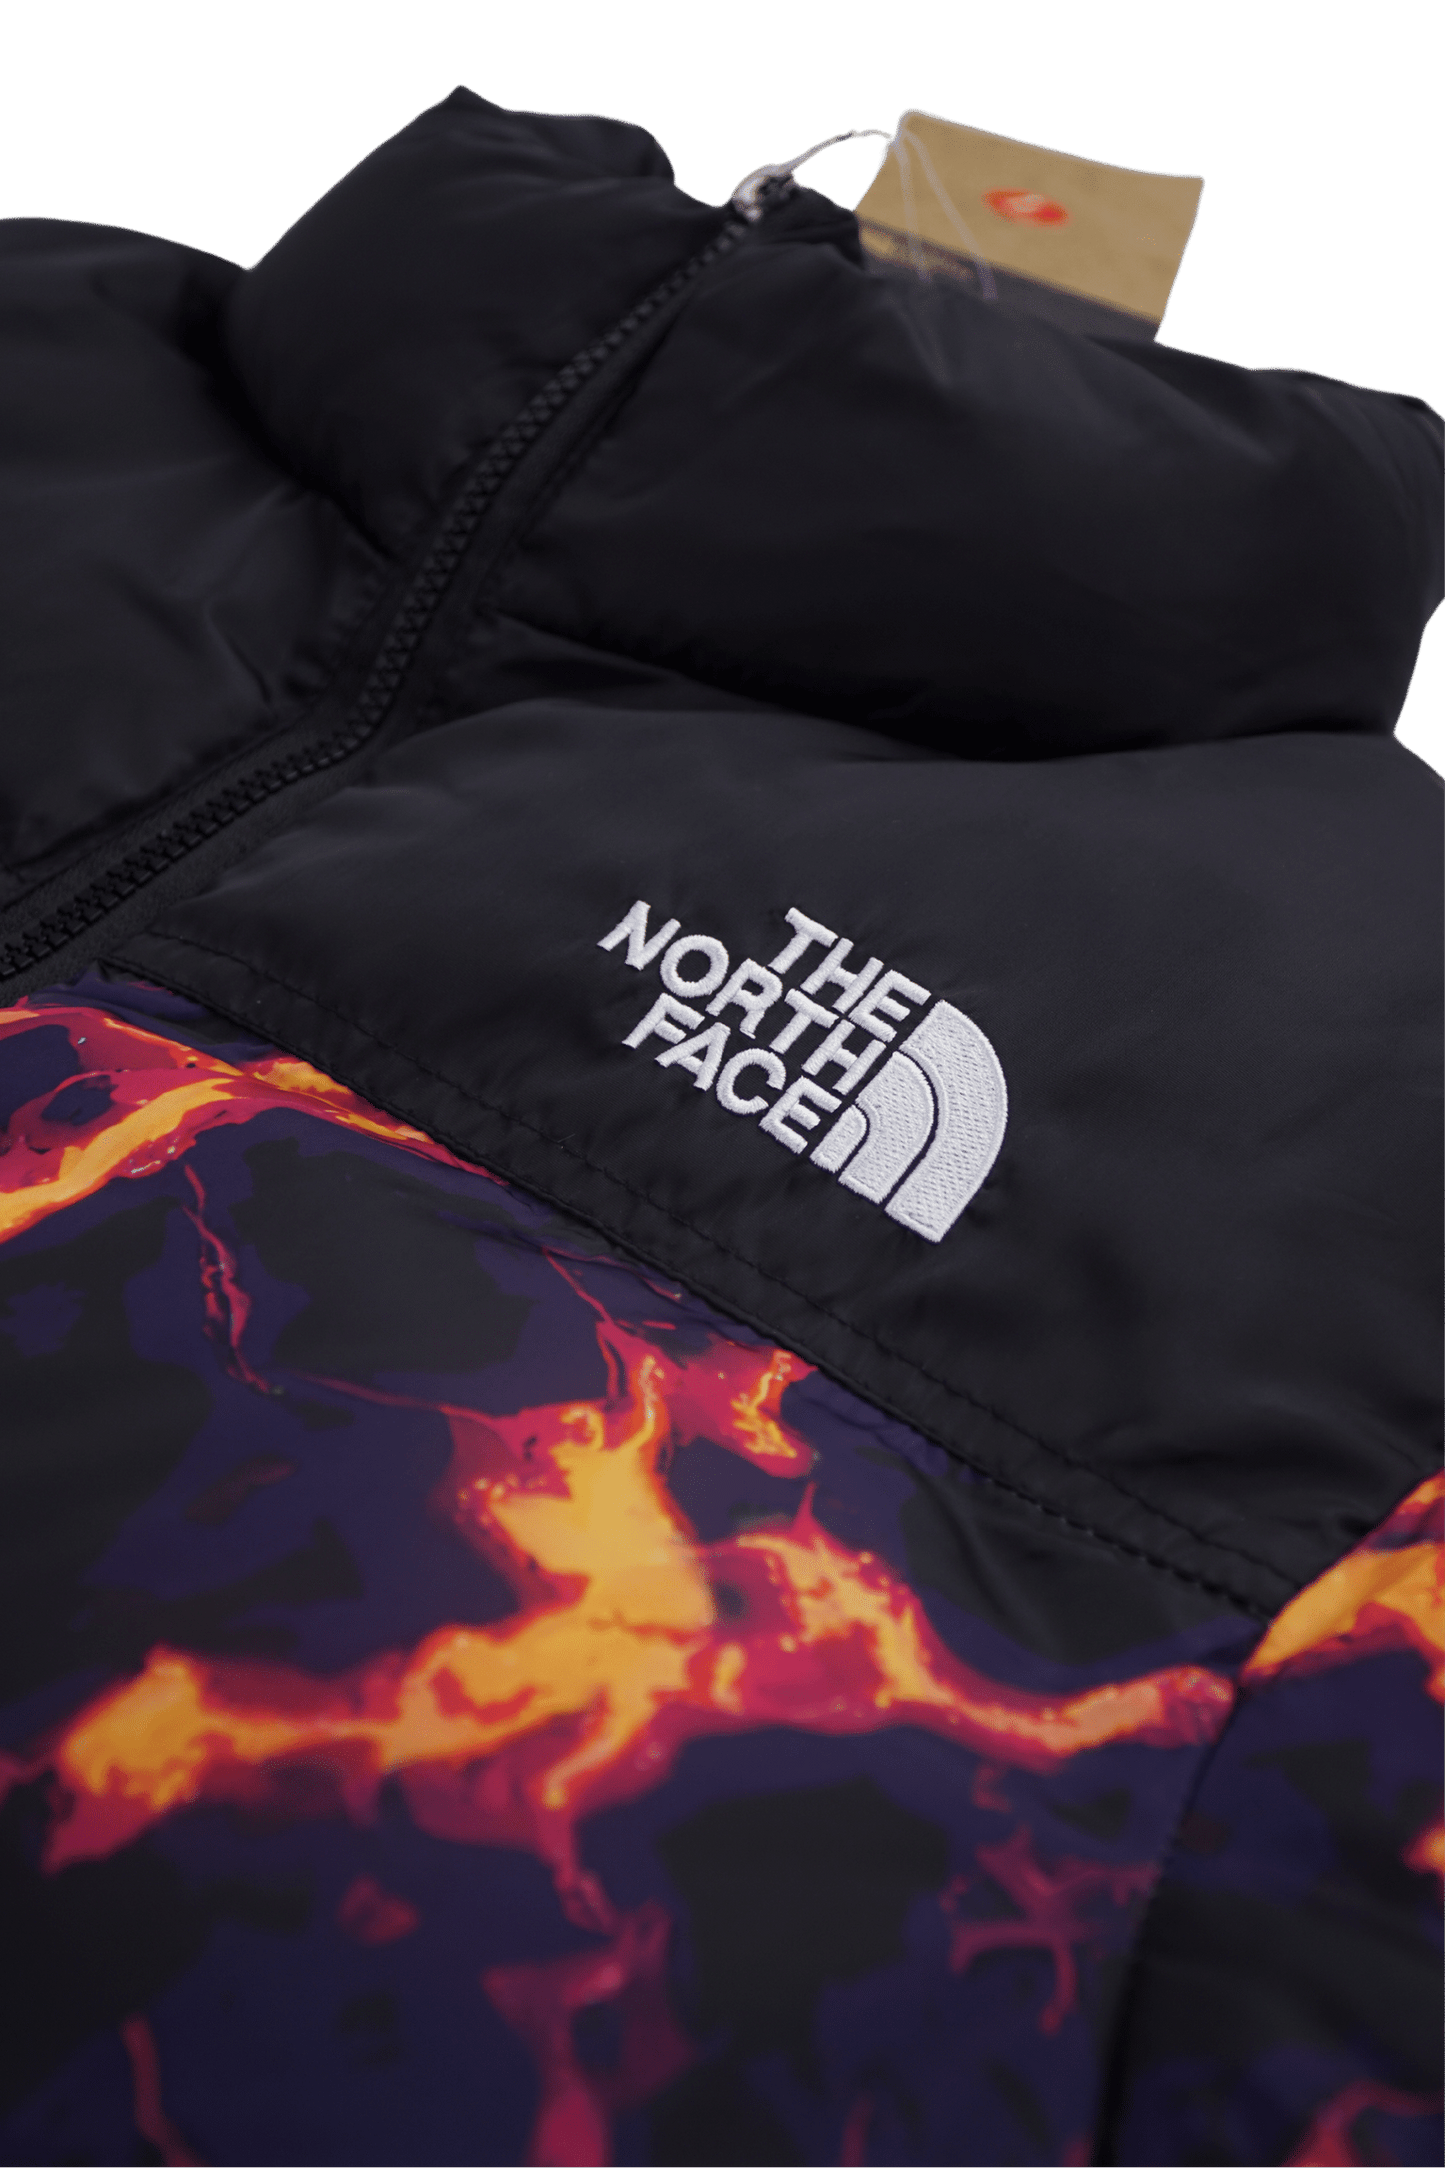 The North Face Lhotse Black & Marble Puffer Jacket